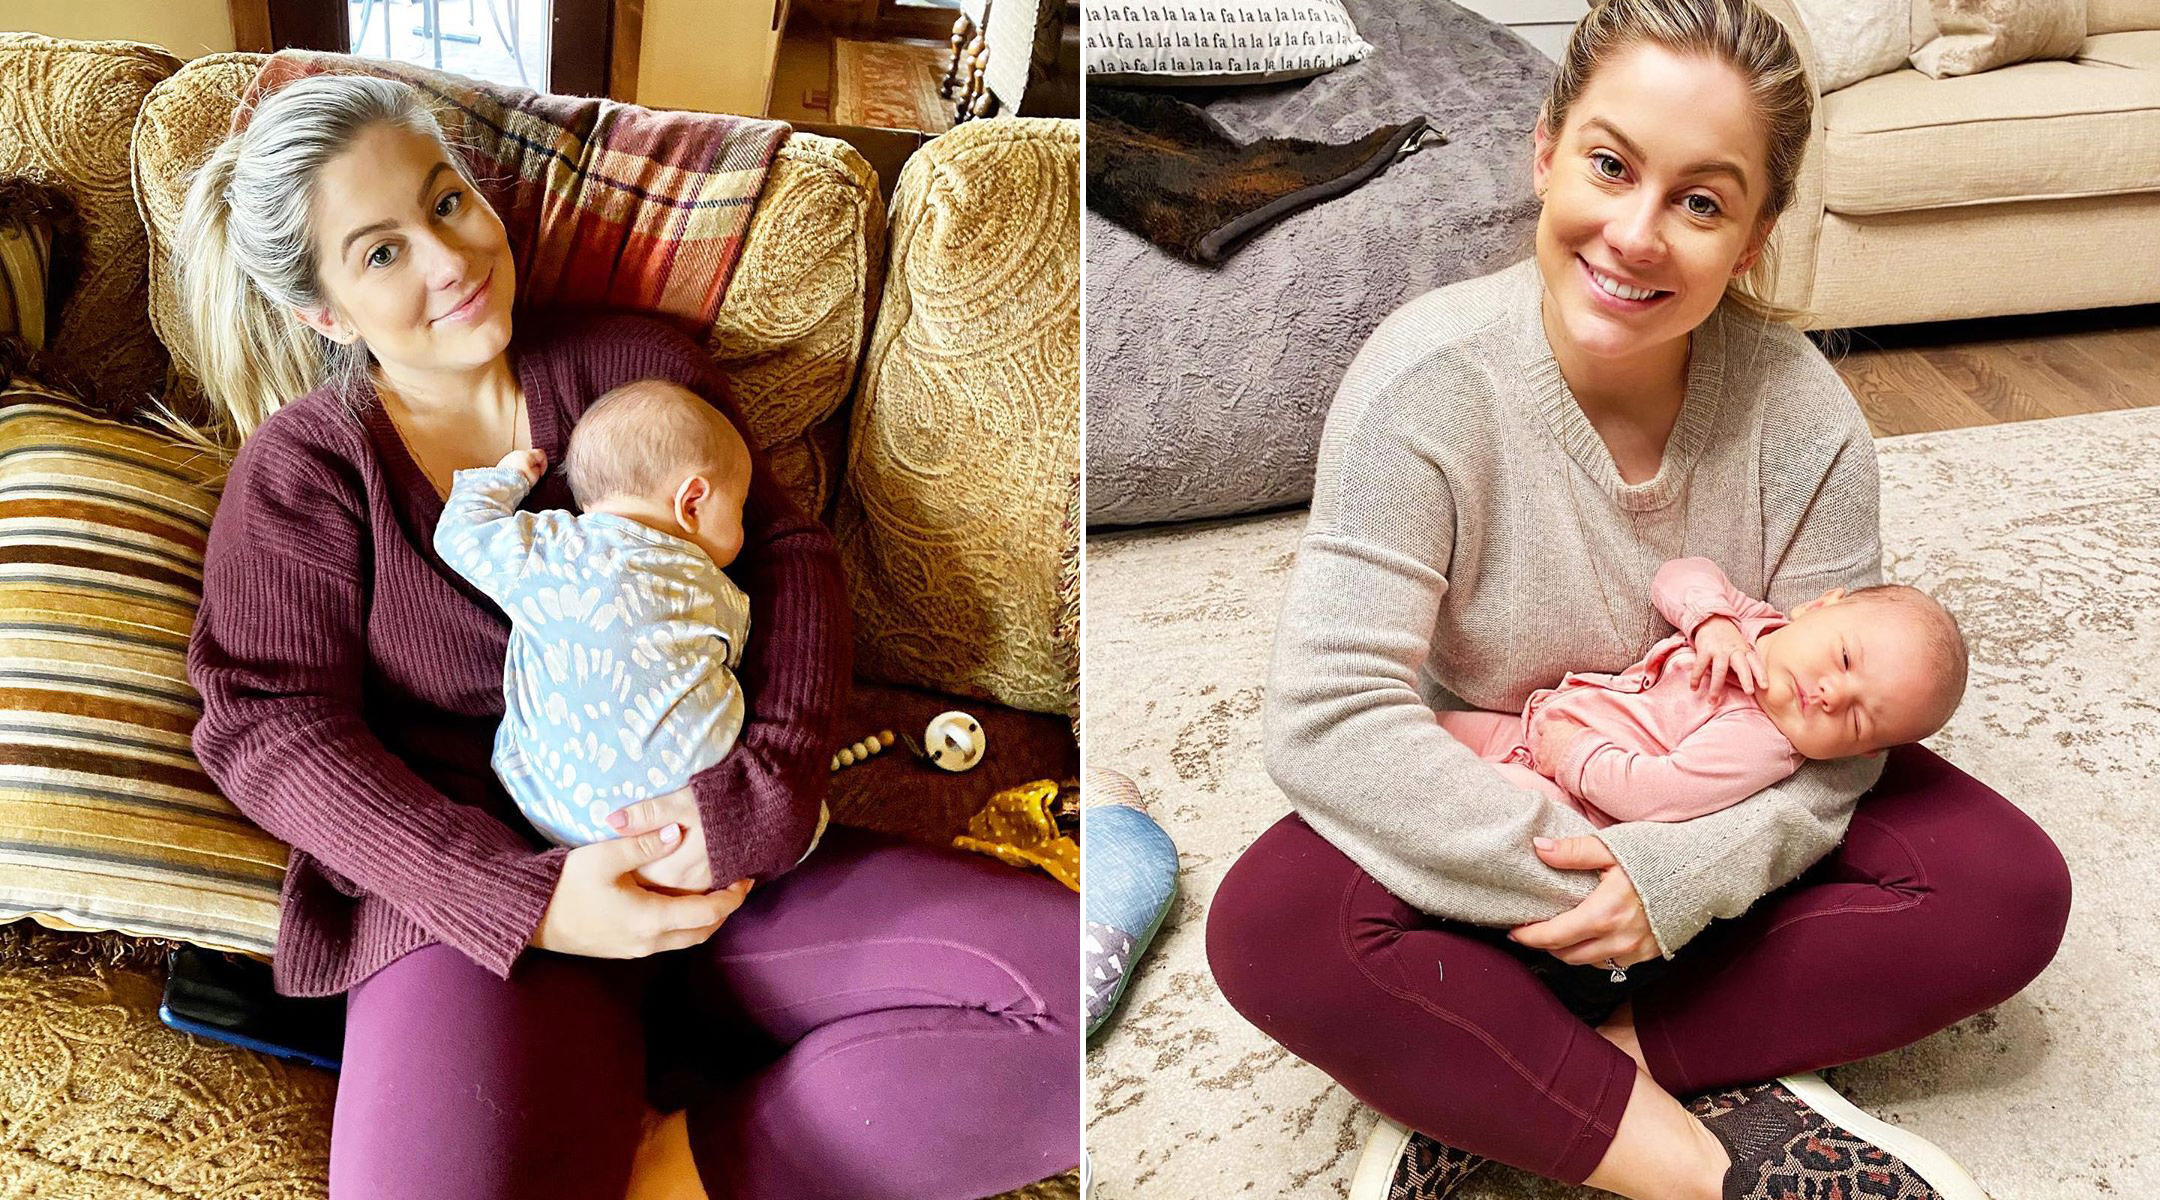 shawn johnson opens up about how motherhood has changed her